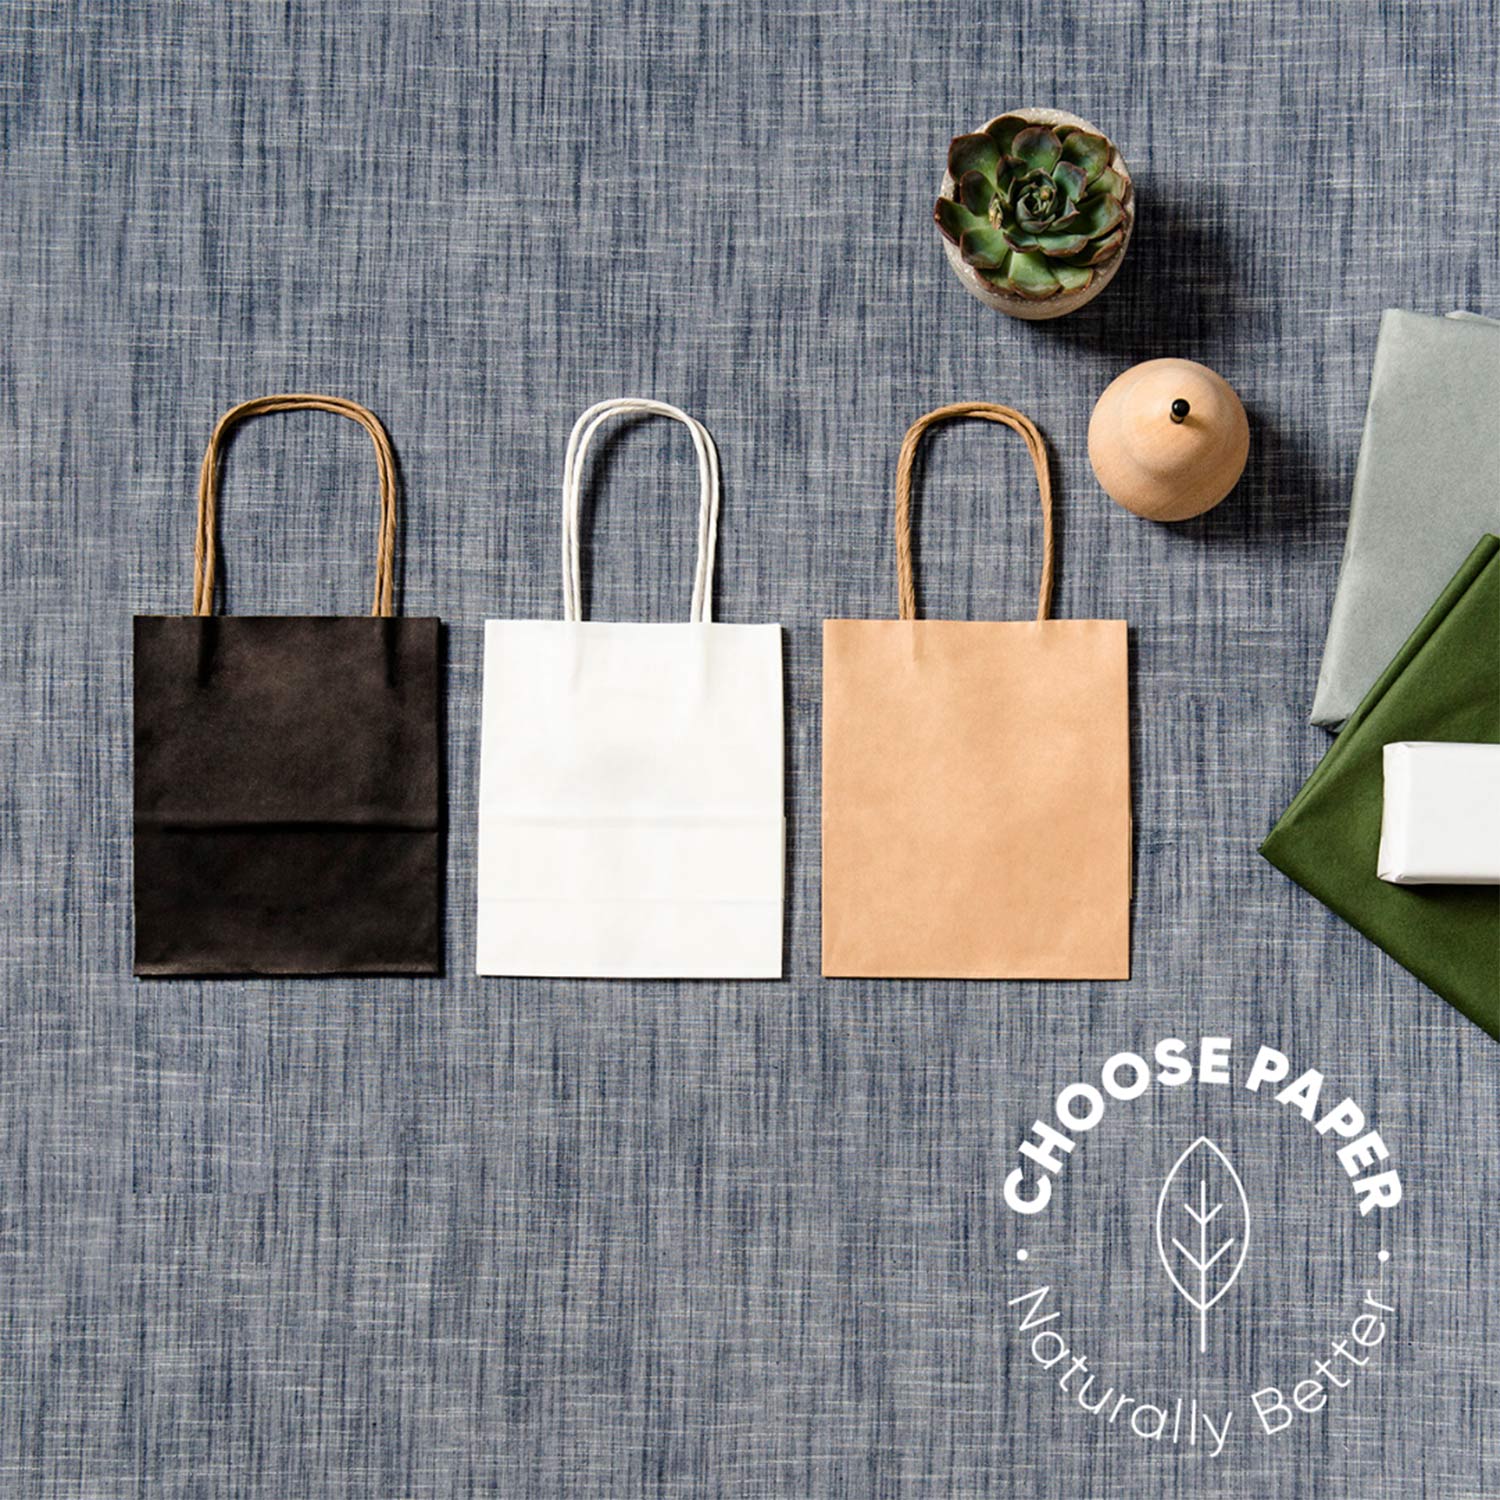 Image of three paper carry bags with logo "Choose paper. Naturally Better". 